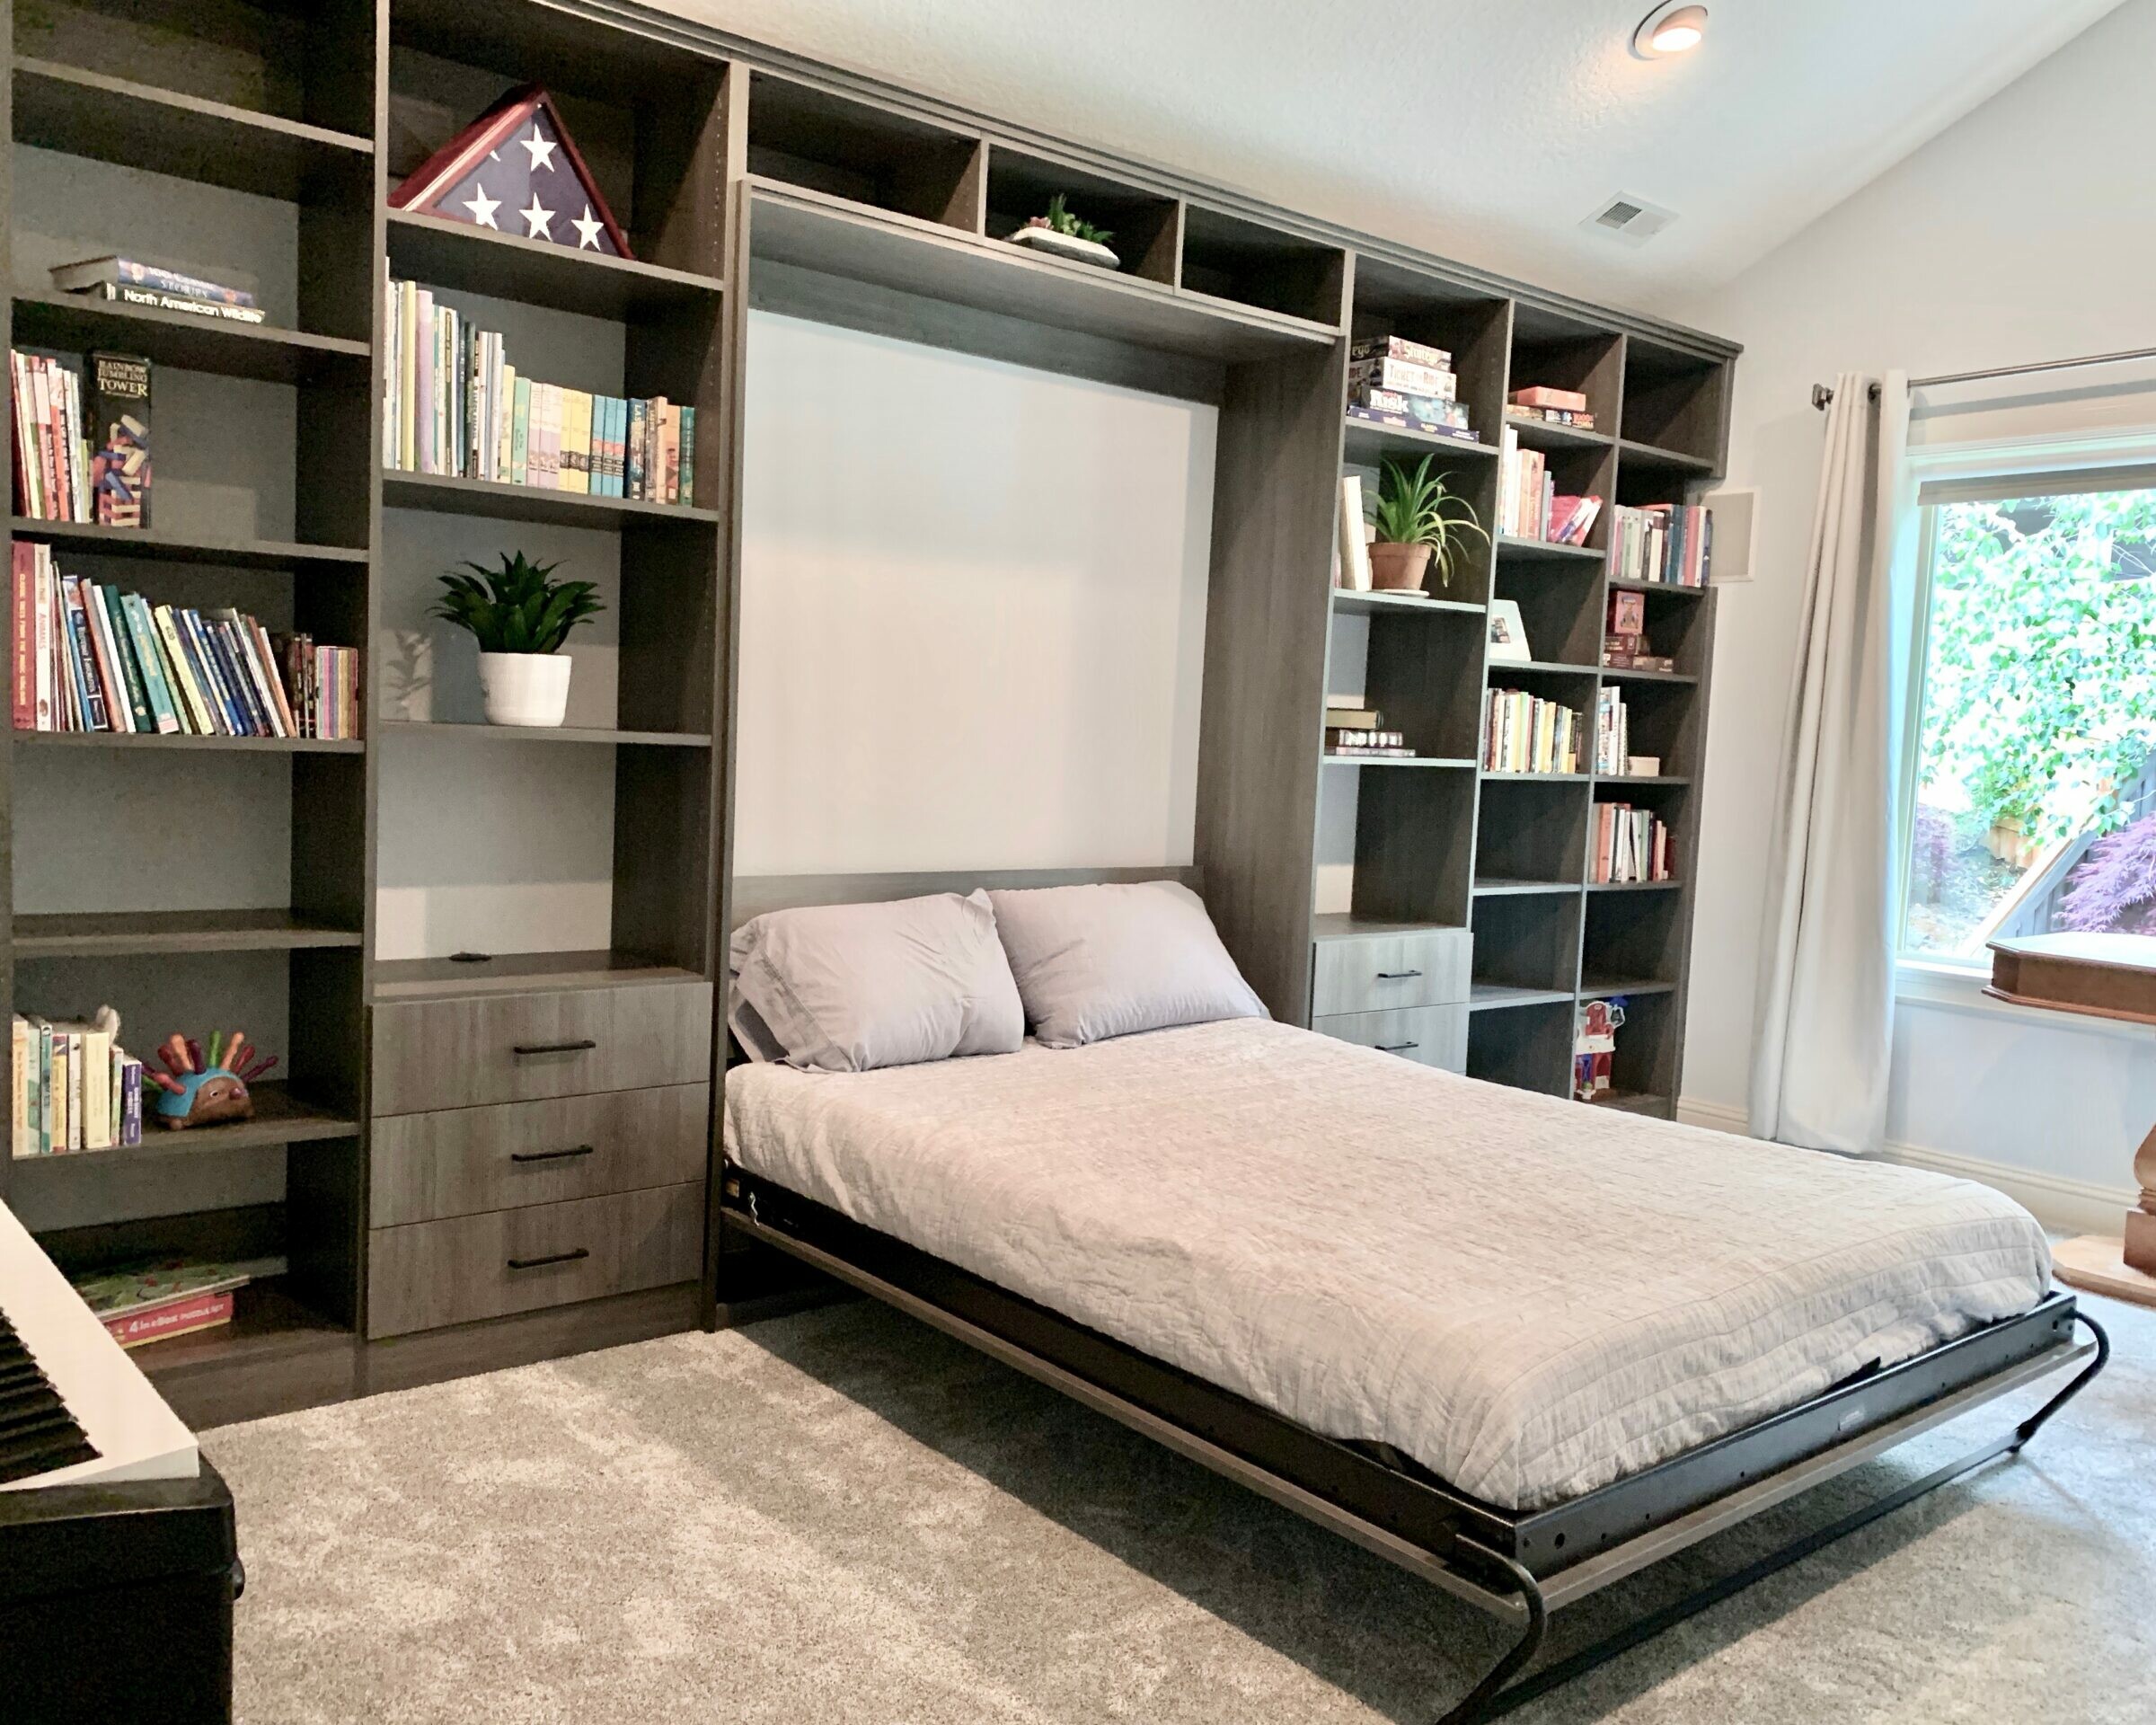 Queen Murphy Bed Built-in Wall to Wall with drawers on each side and book shelving floor to ceiling and wall to wall. Pewter Pine finish.